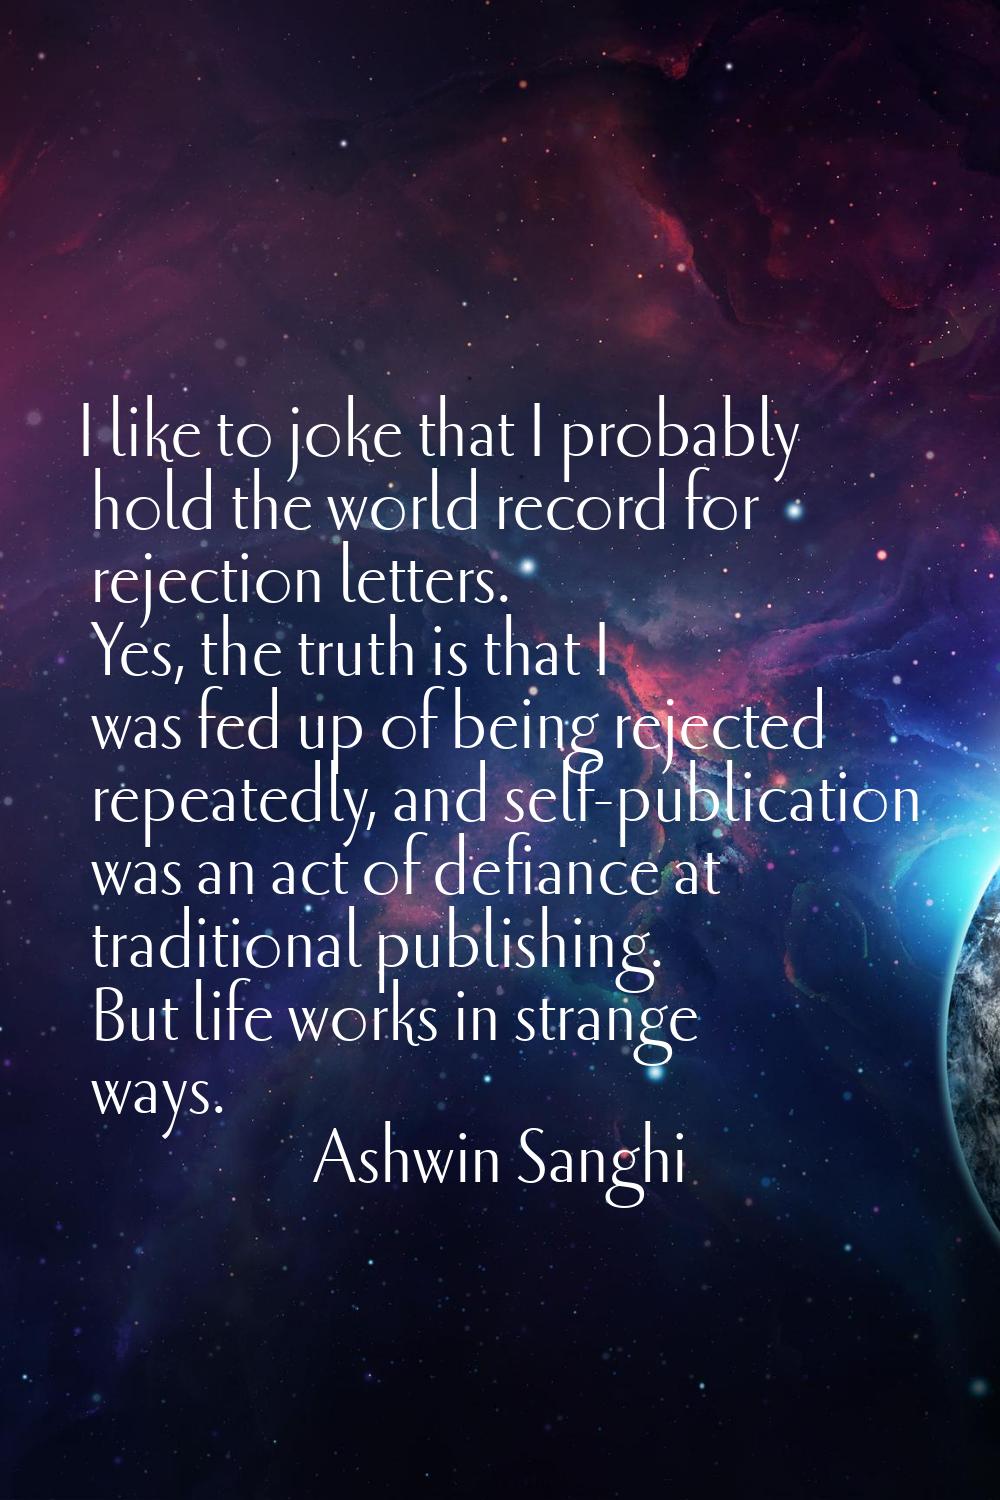 I like to joke that I probably hold the world record for rejection letters. Yes, the truth is that 